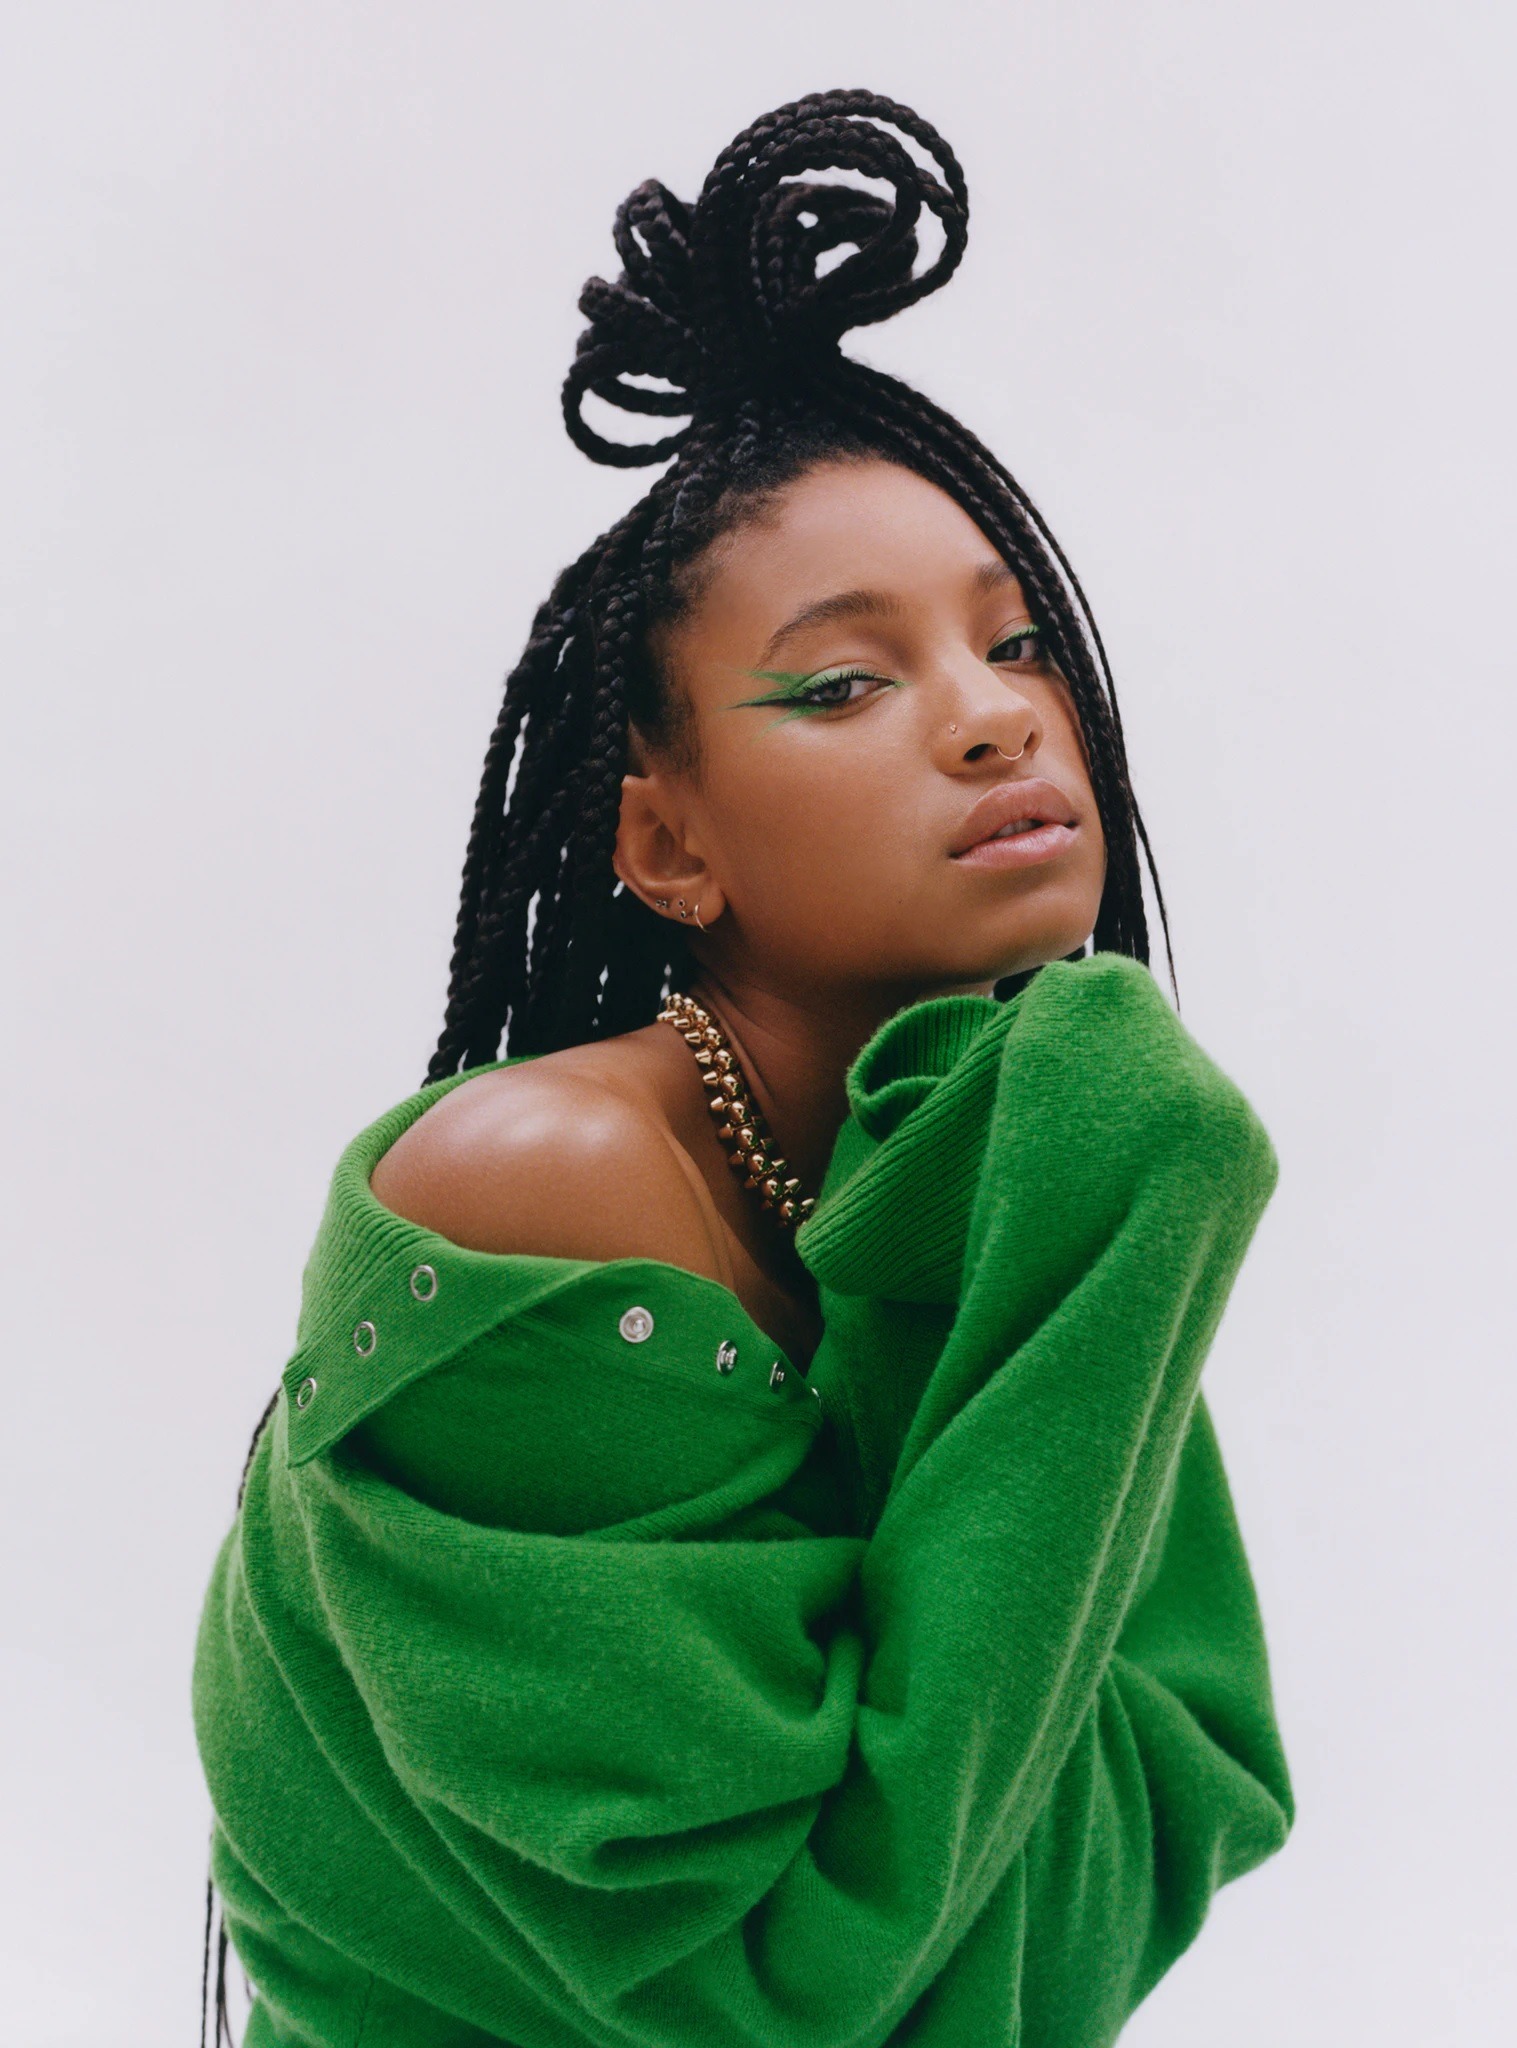 willow-smith-releases-her-single-lipstick-for-her-album-lately-i-feel-everything